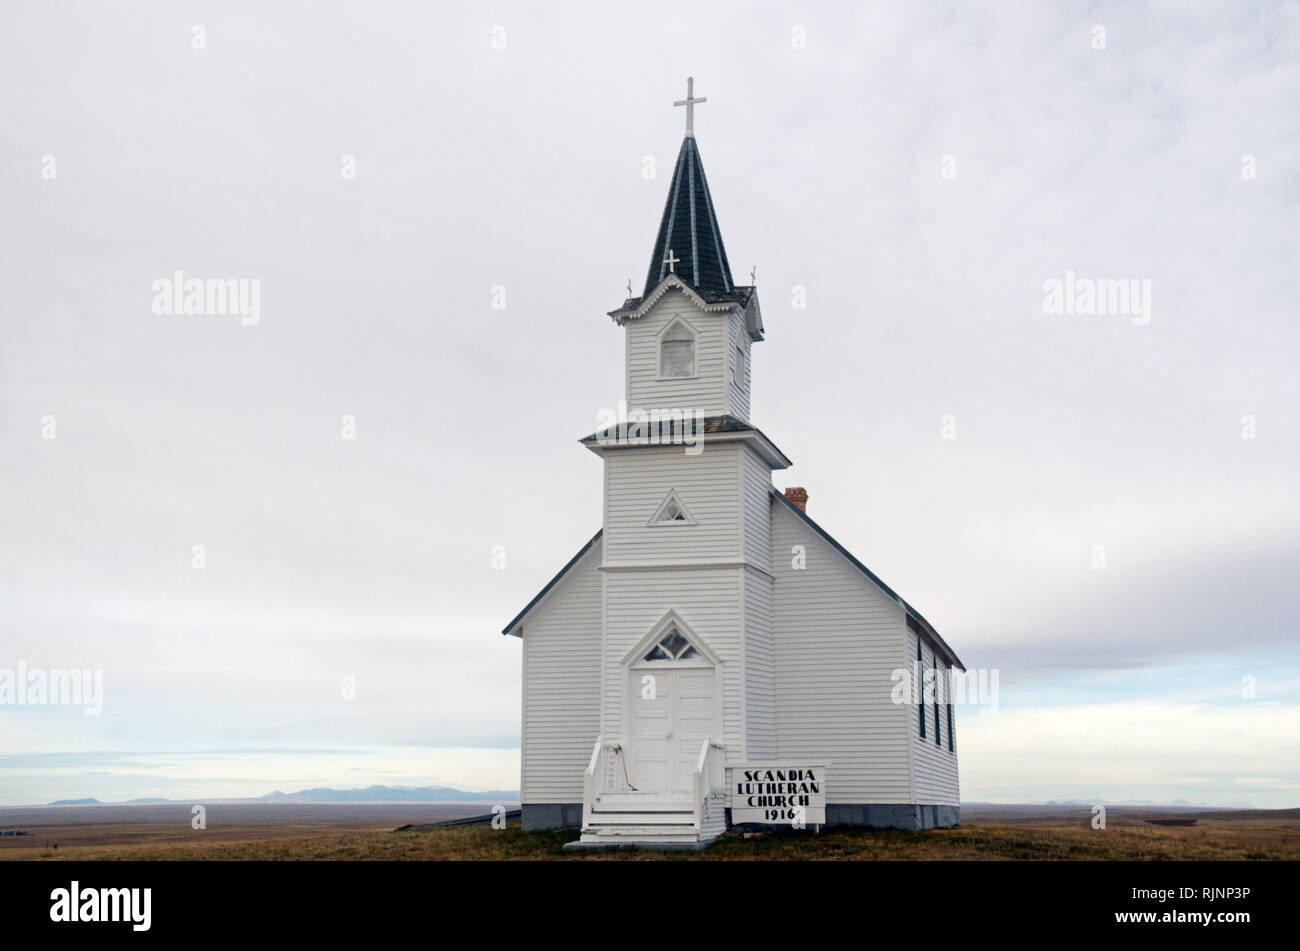 Lutheran Church established in 1916 on the Great Plains in Phillips County, Montana. Stock Photo